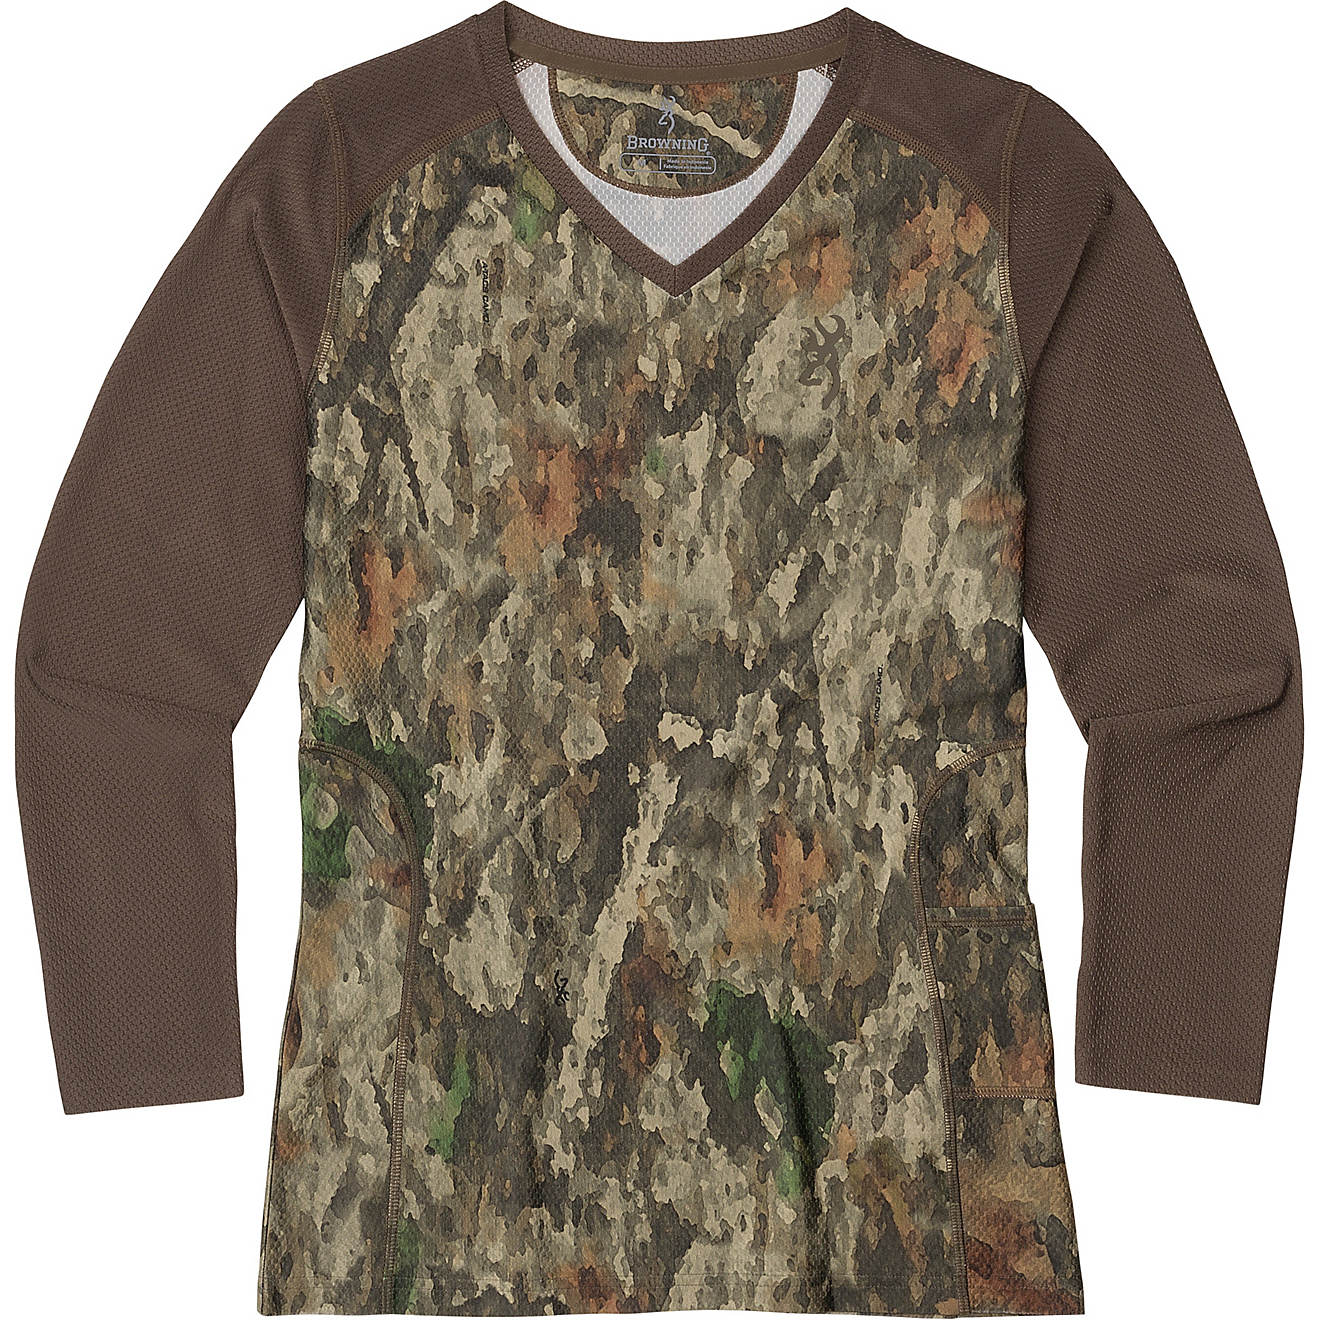 Browning Performance Speed T-Shirt S ATACS-AU 